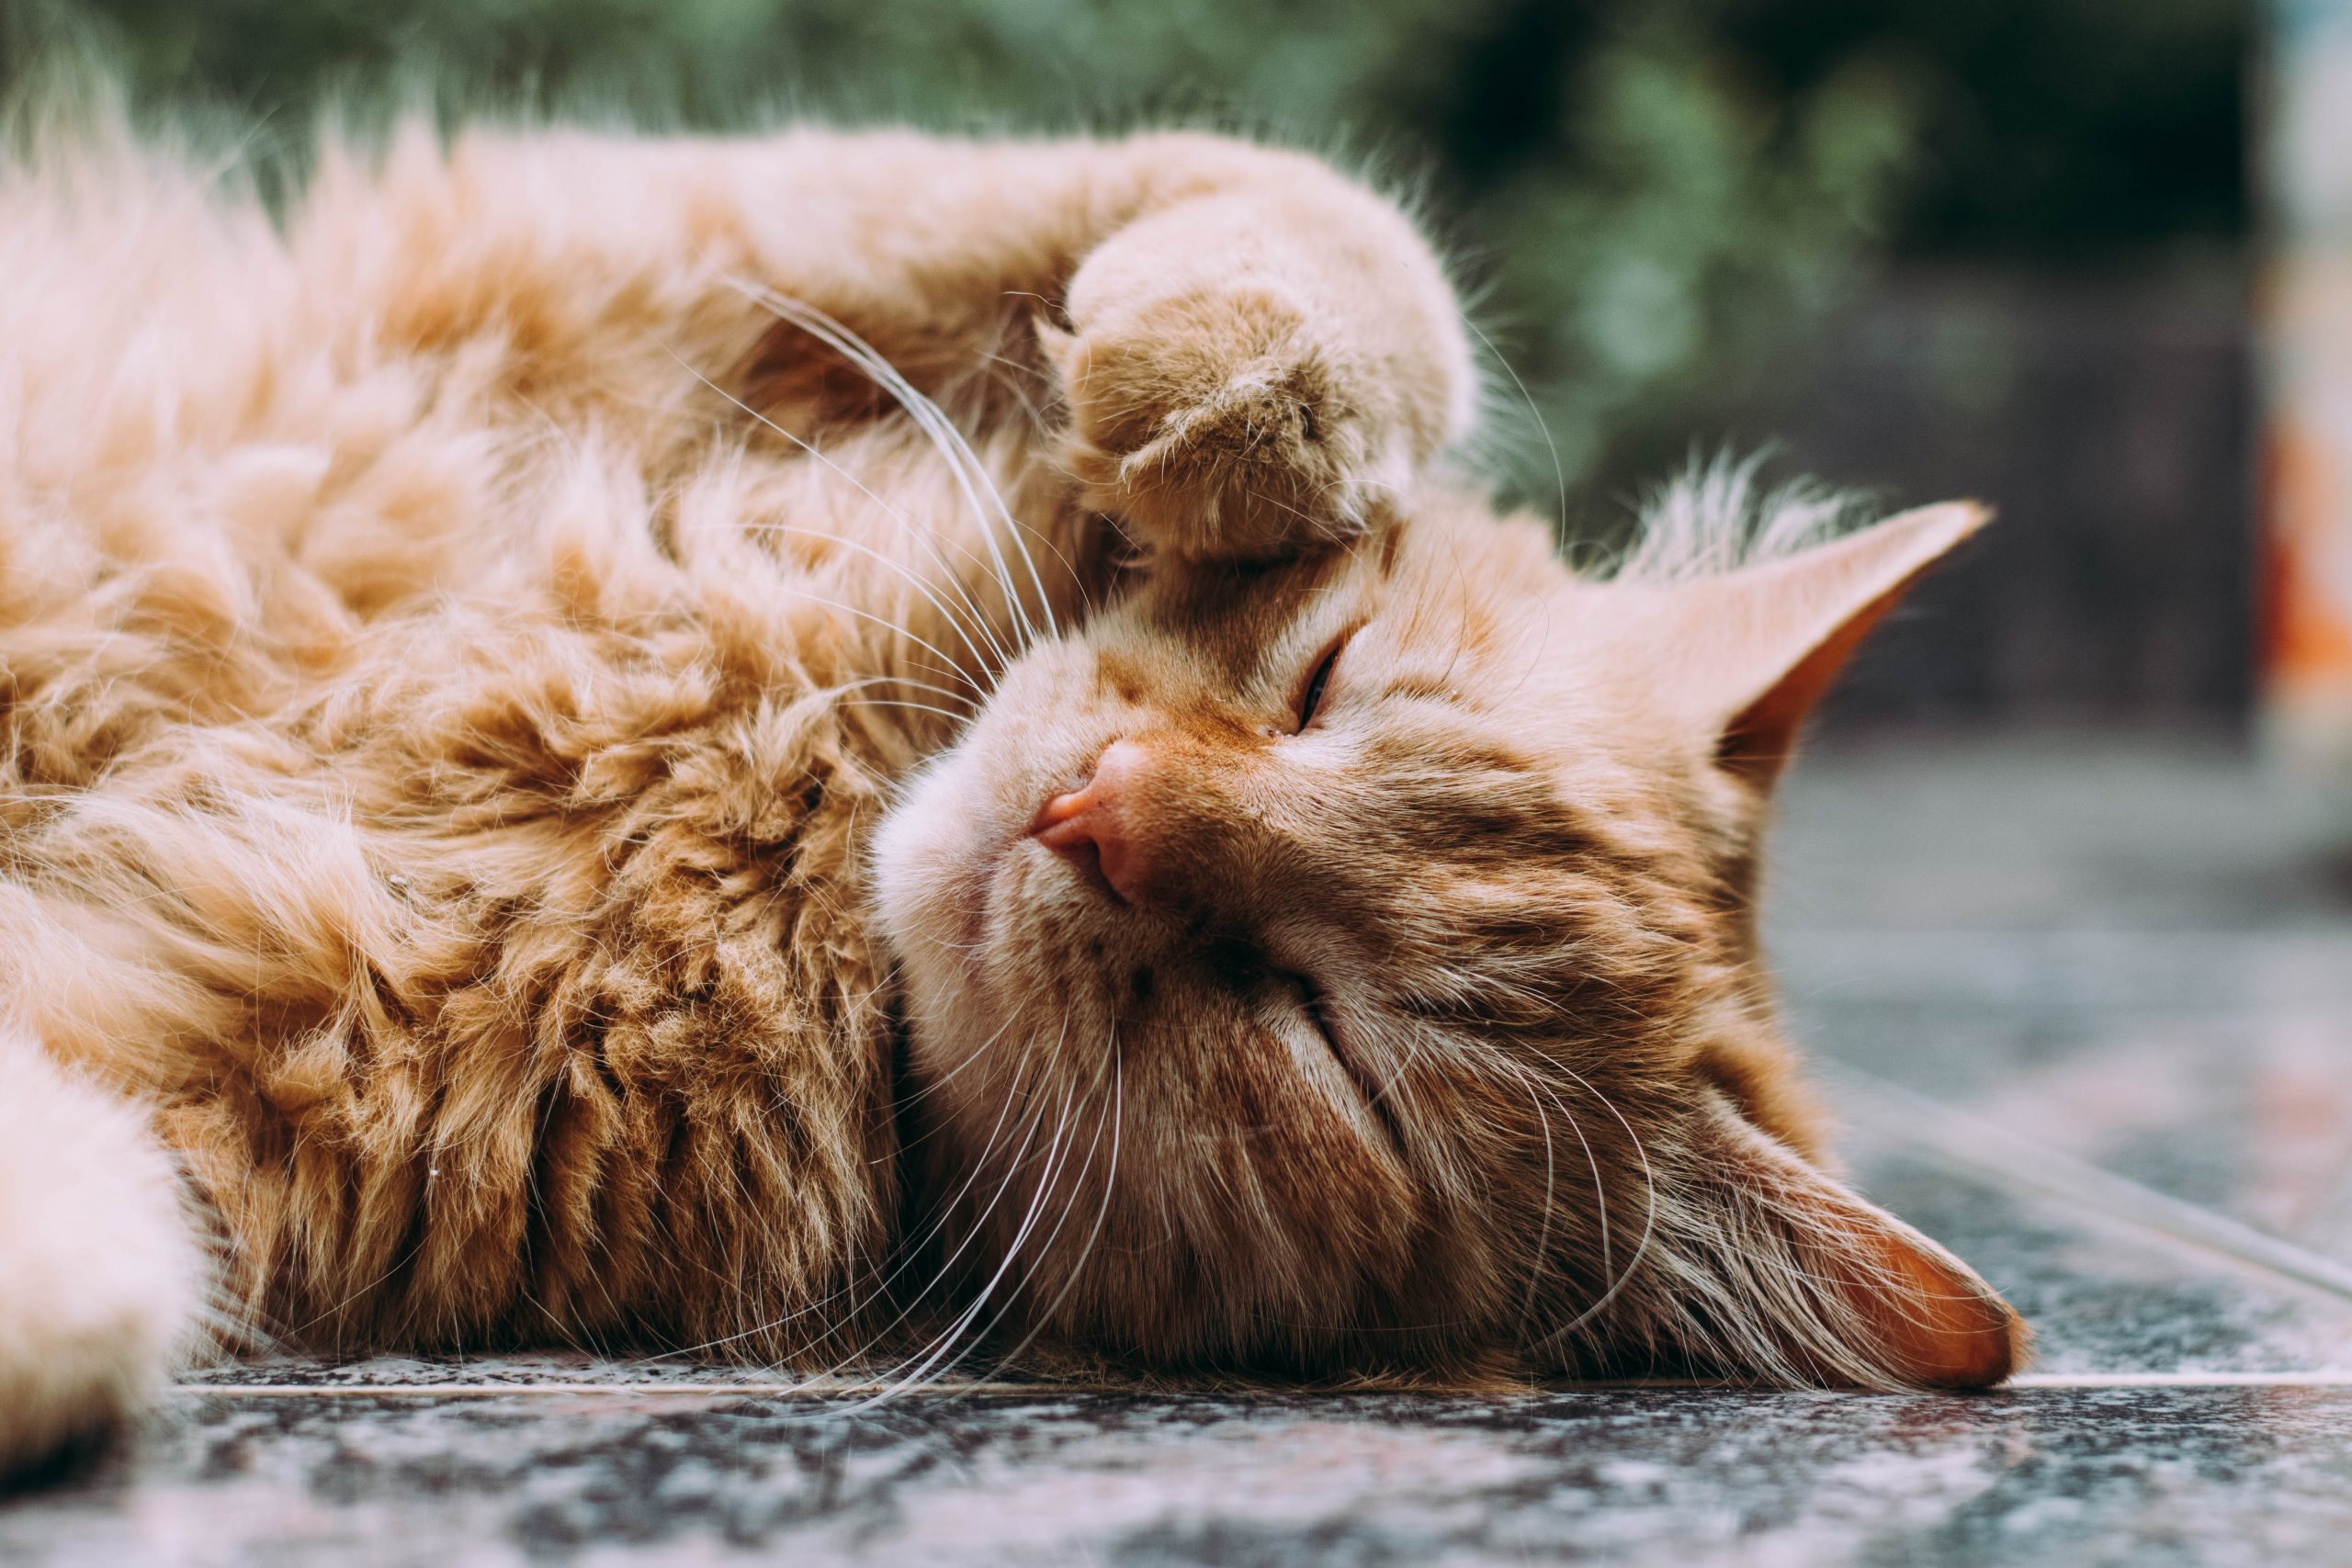 Why has my cat’s fur gone lumpy? | All you need to know